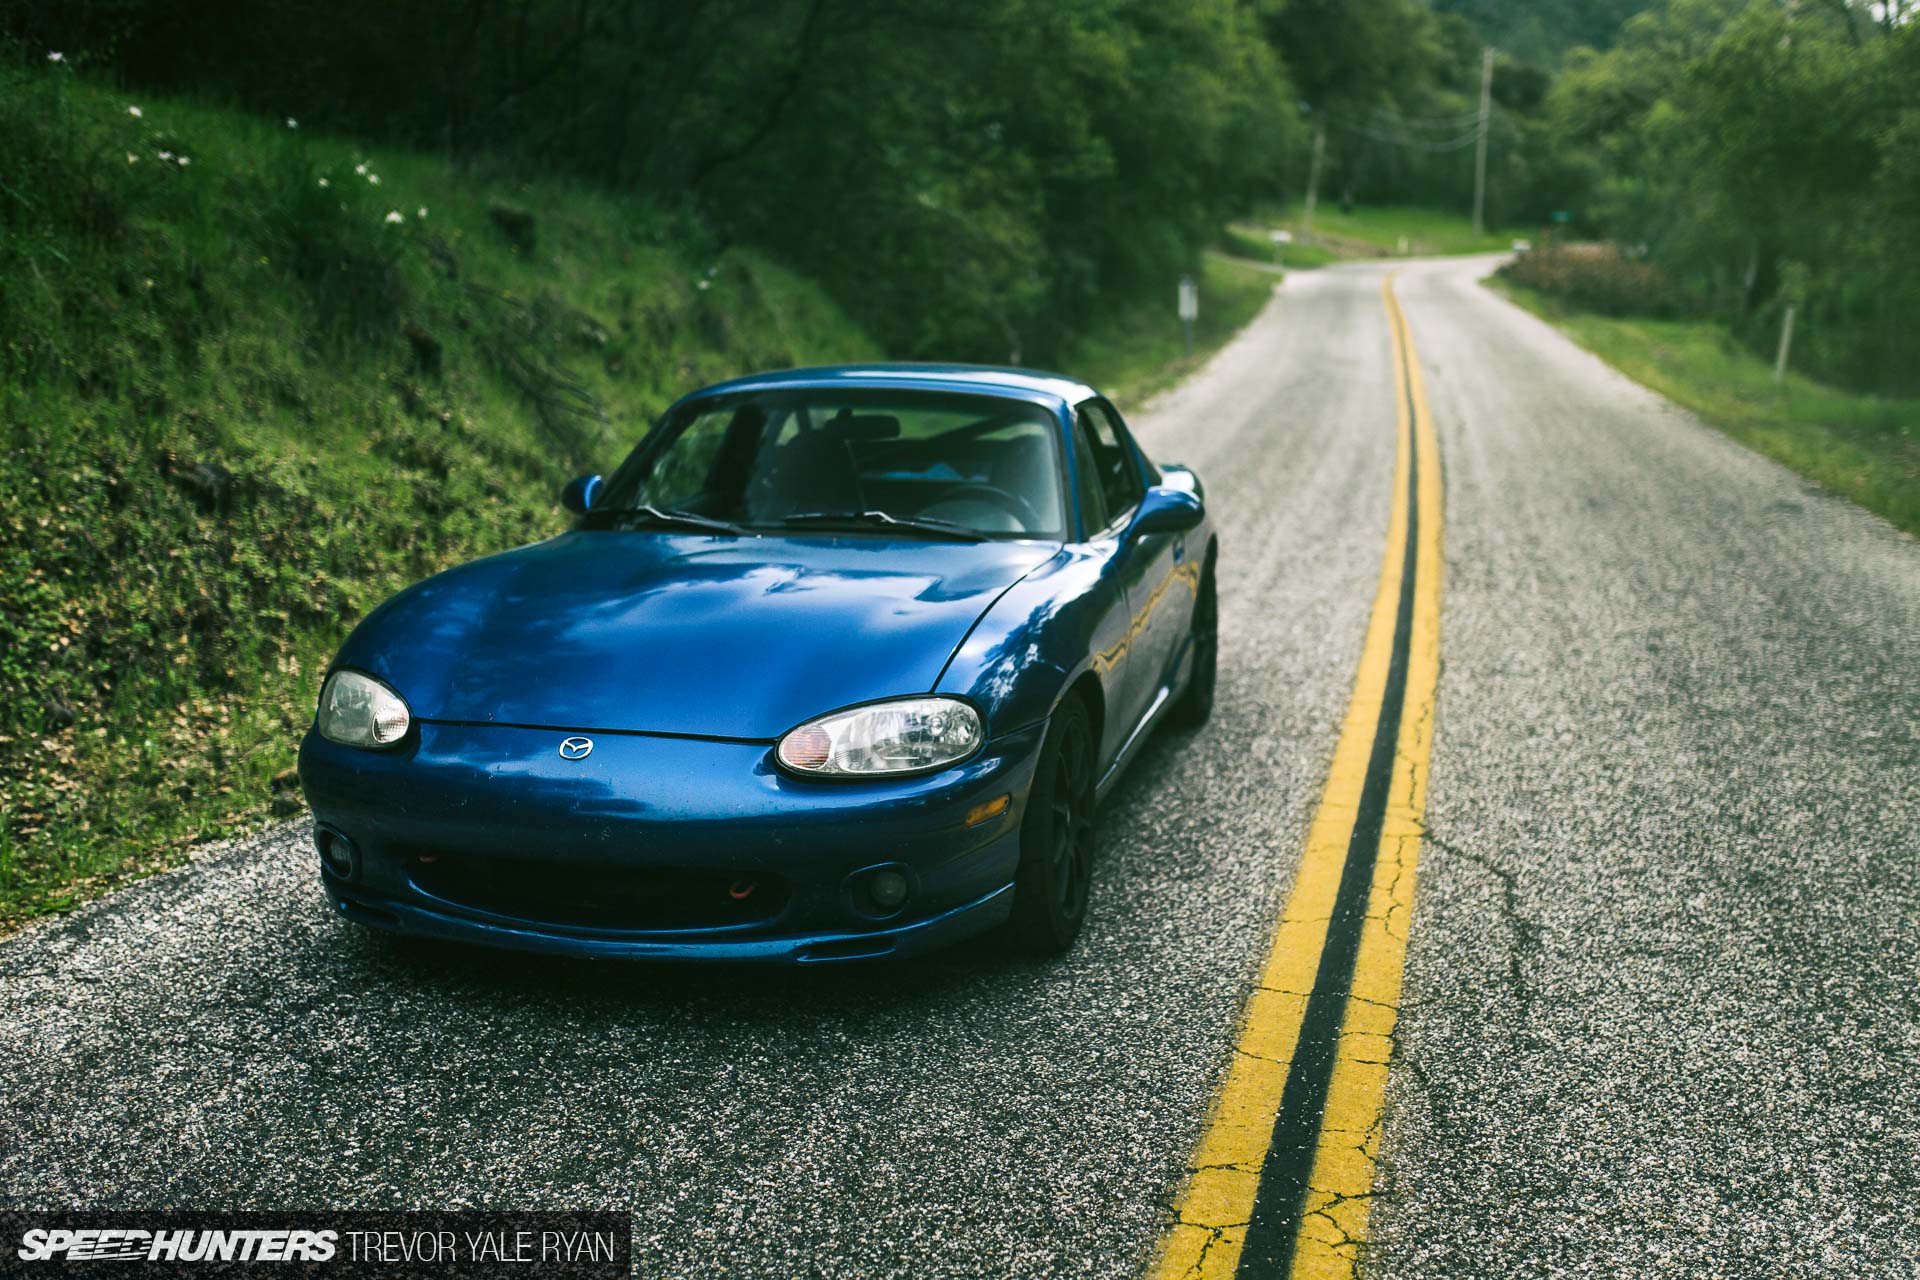 Always Take The Long Way JDM Windshield Banner by Bad Investments